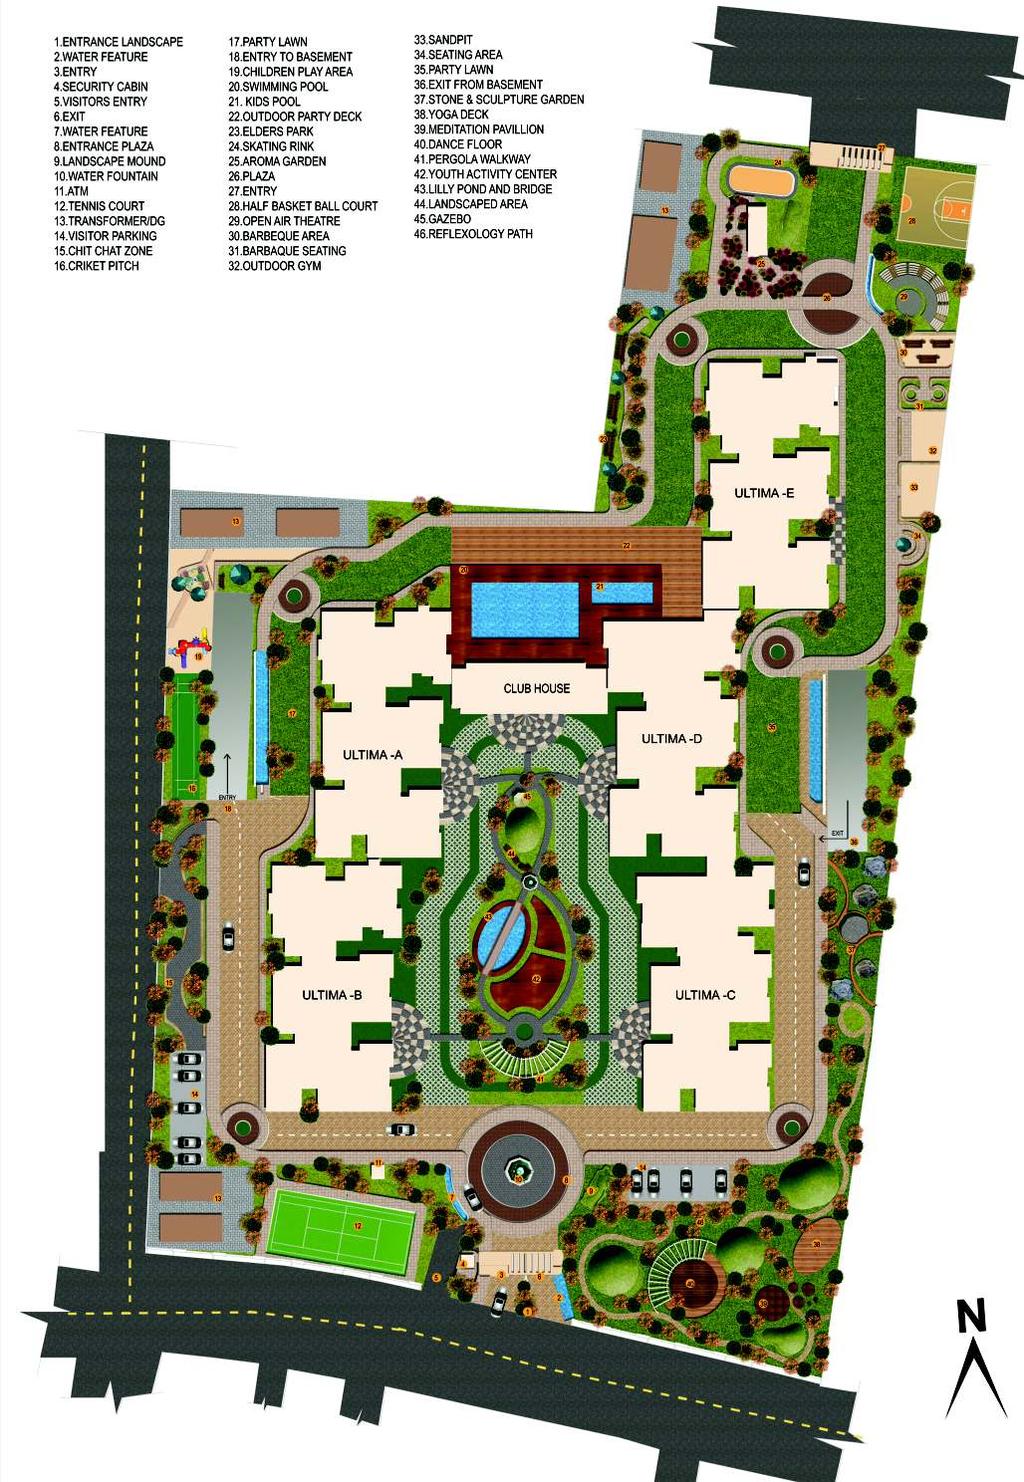 MASTER PLAN 1. ENTRANCE LANDSCAPE 2. WATER FEATURE 3. ENTRY 4. SECURITY CABIN 5. VISITORS ENTRY 6. EXIT 7. WATER FEATURE 8. ENTRANCE PALZA 9. LANDSCAPE MOUND 10. WATER FOUNTAIN 11. ATM 12.